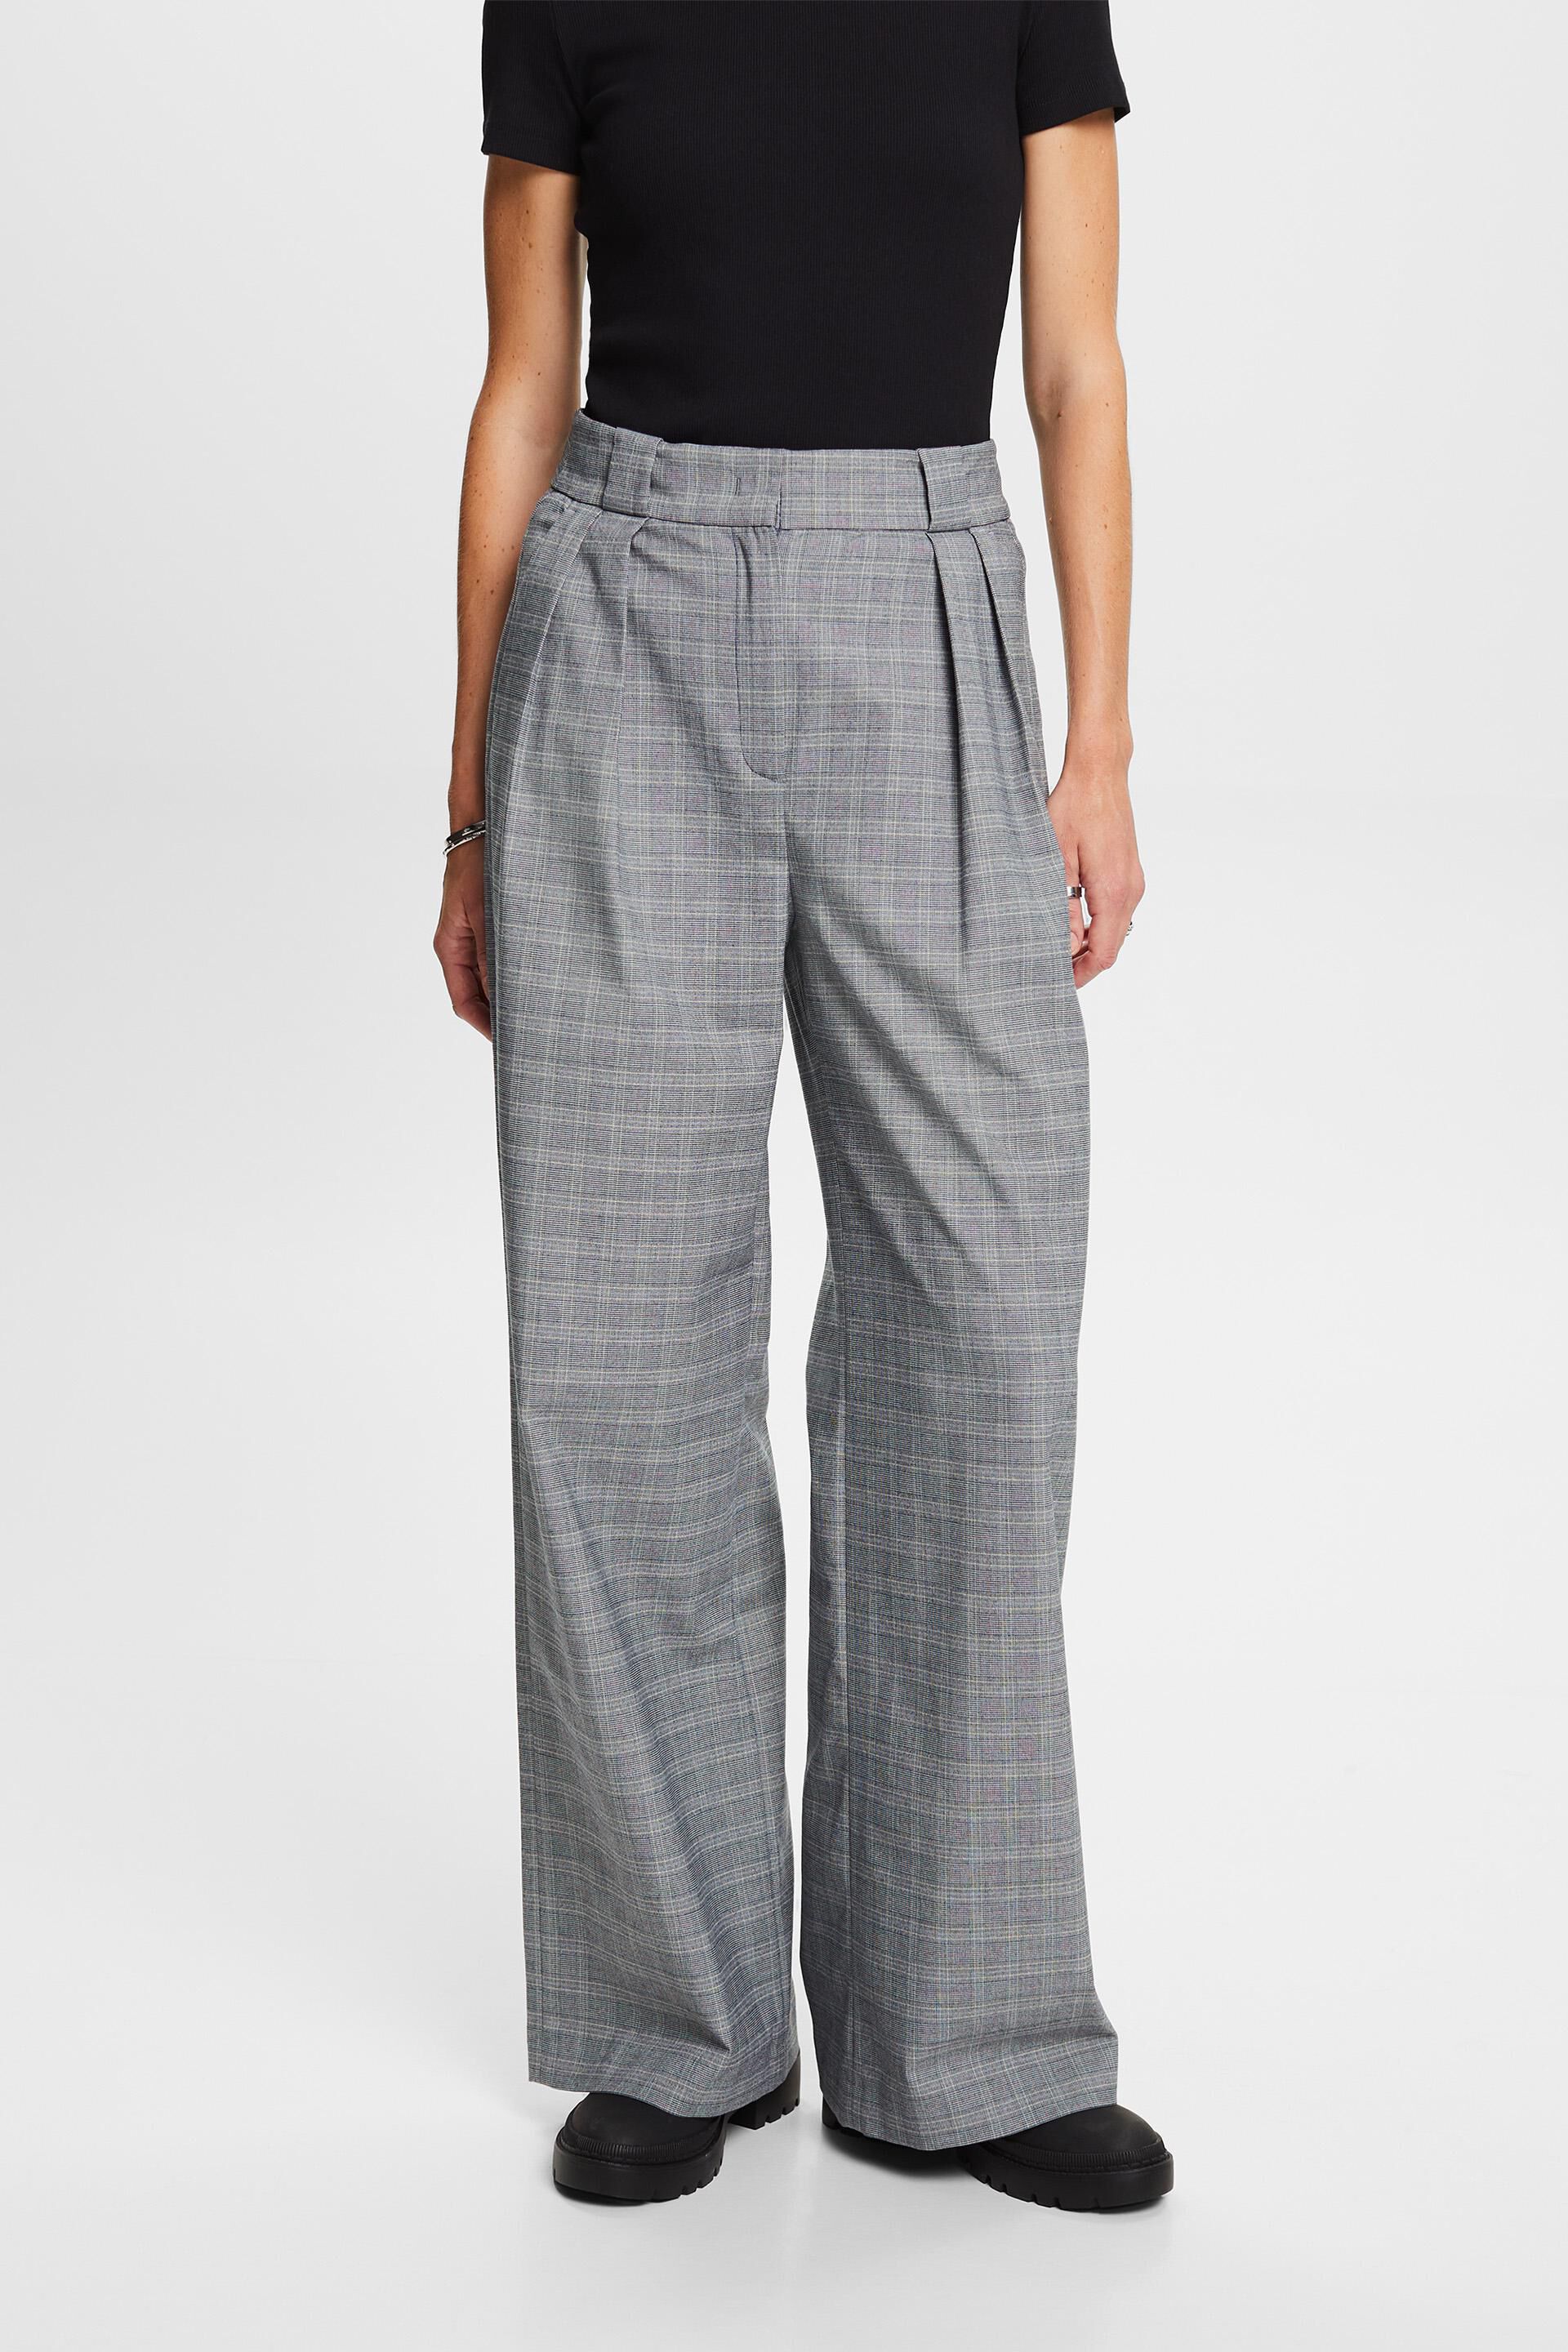 Esprit Match: Prince of Mix checked Wales & trousers